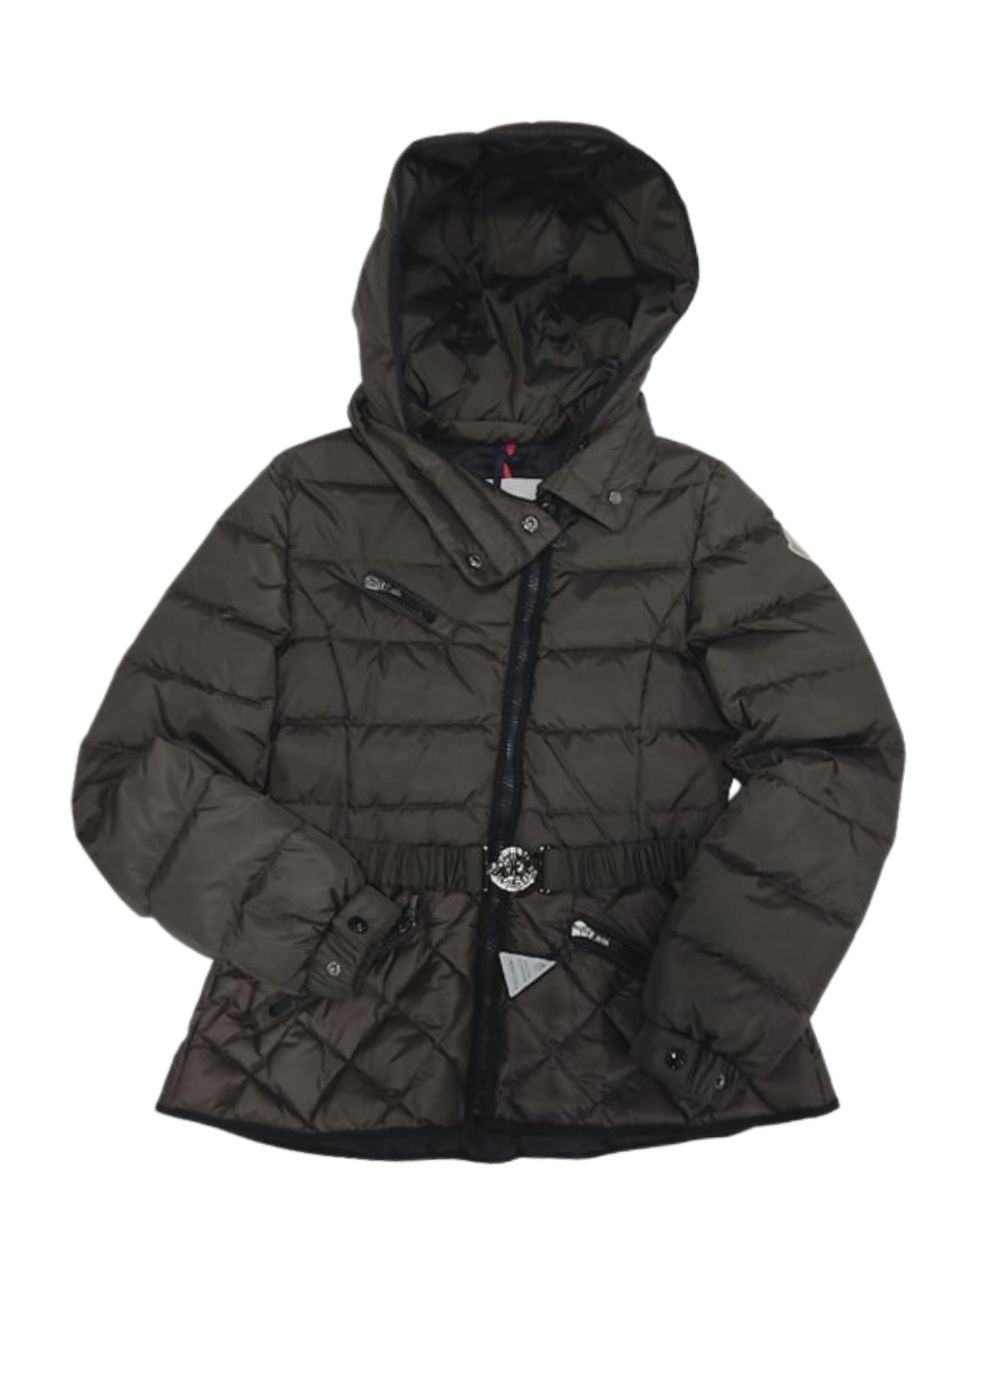 Featured image for “MONCLER PIUMINO BAMBINA”